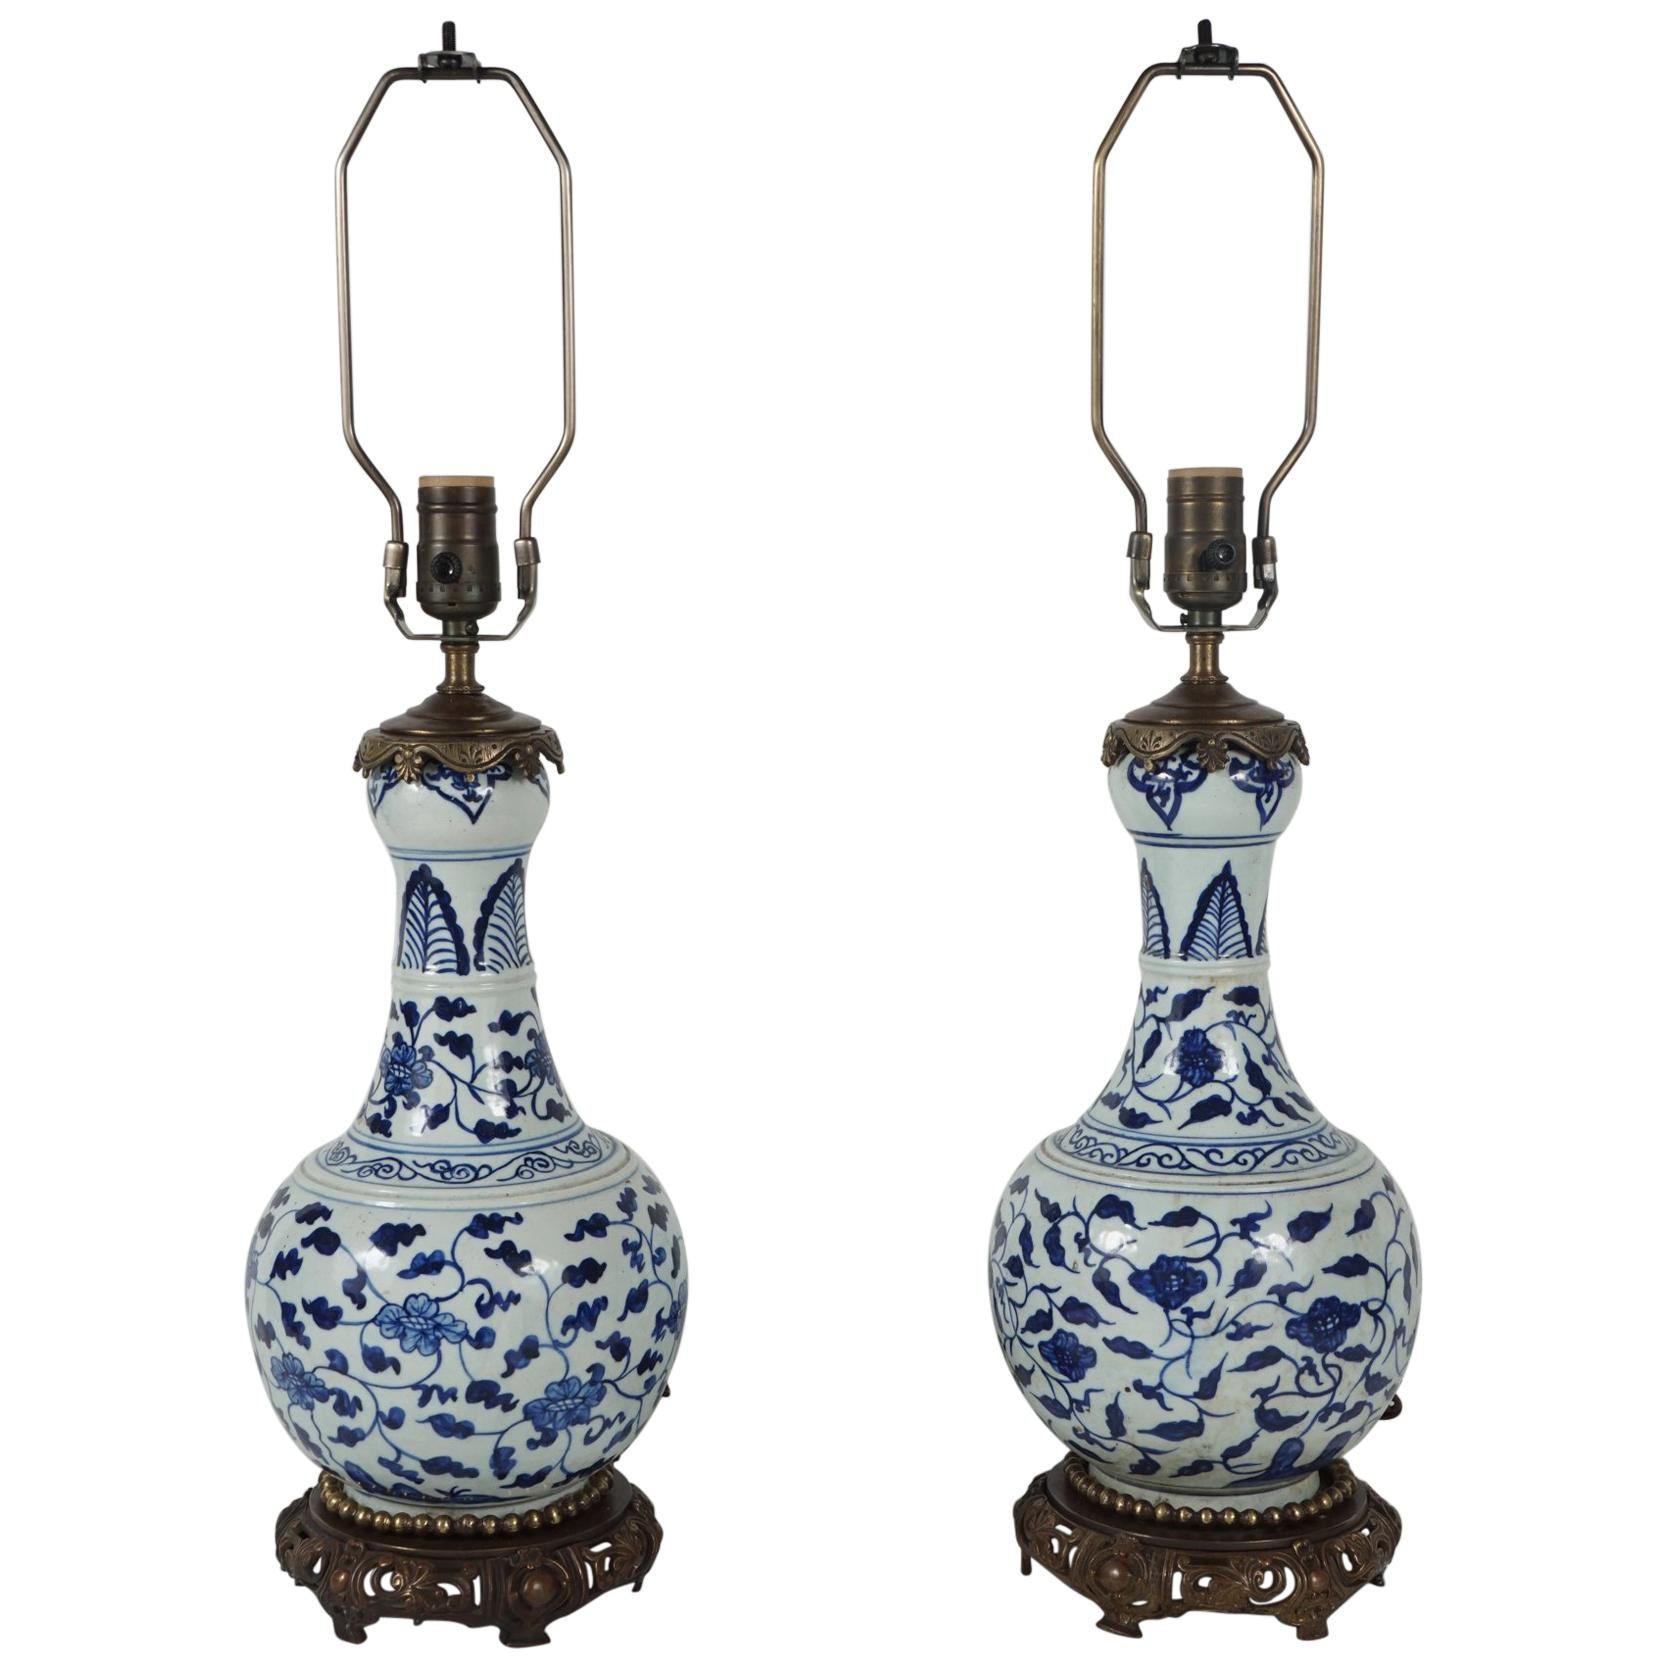 Pair of Bronze Accented Chinese Blue & White Garlic Head Vases Mounted as Lamps For Sale